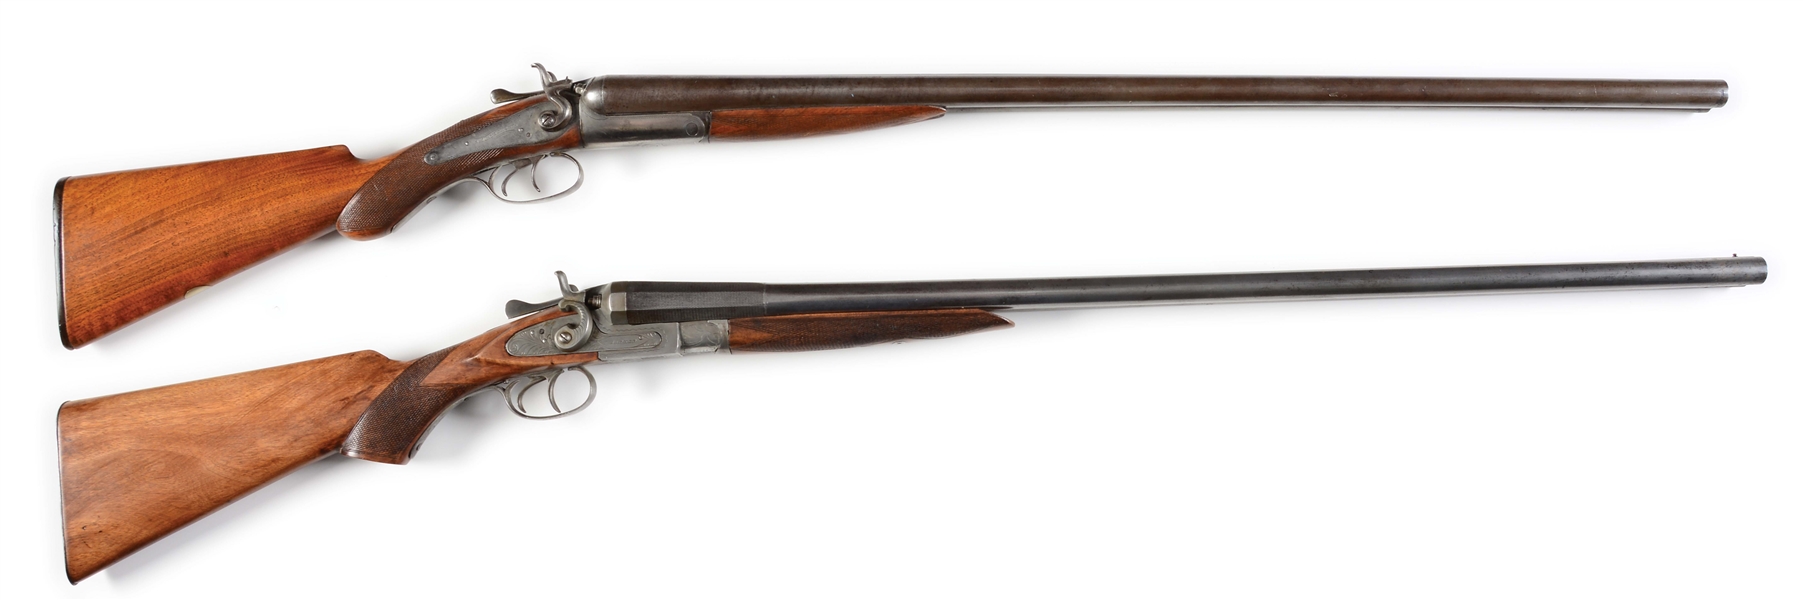 (A) LOT OF TWO: J. MANTON & CO AND BARKER DOUBLE BARREL PERCUSSION SHOTGUNS.